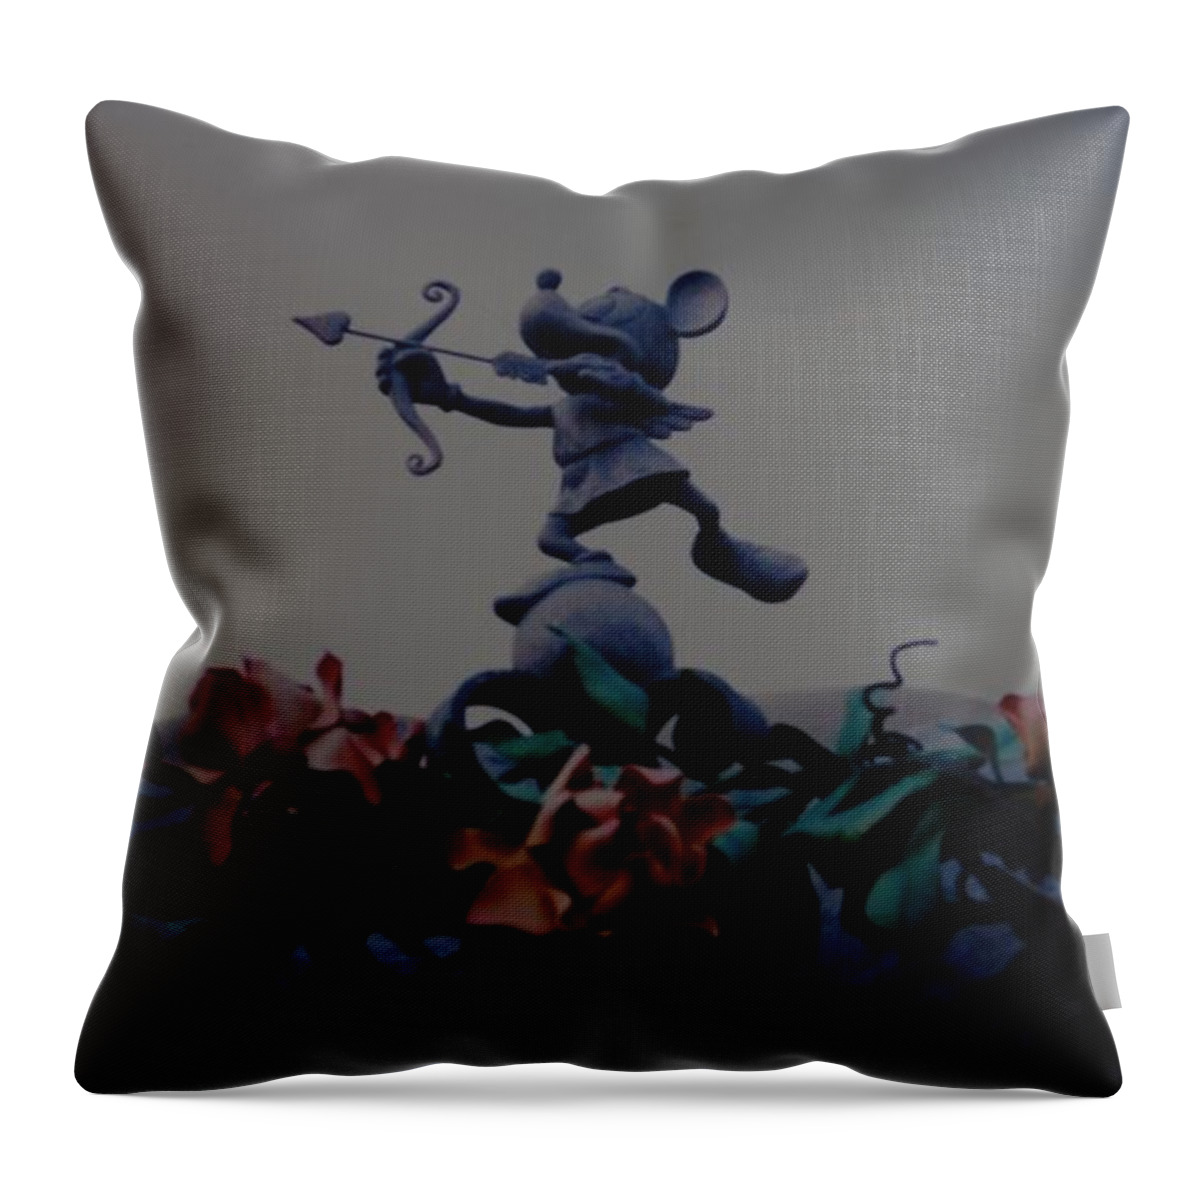 Micky Mouse Throw Pillow featuring the photograph Mickey Mouse by Rob Hans